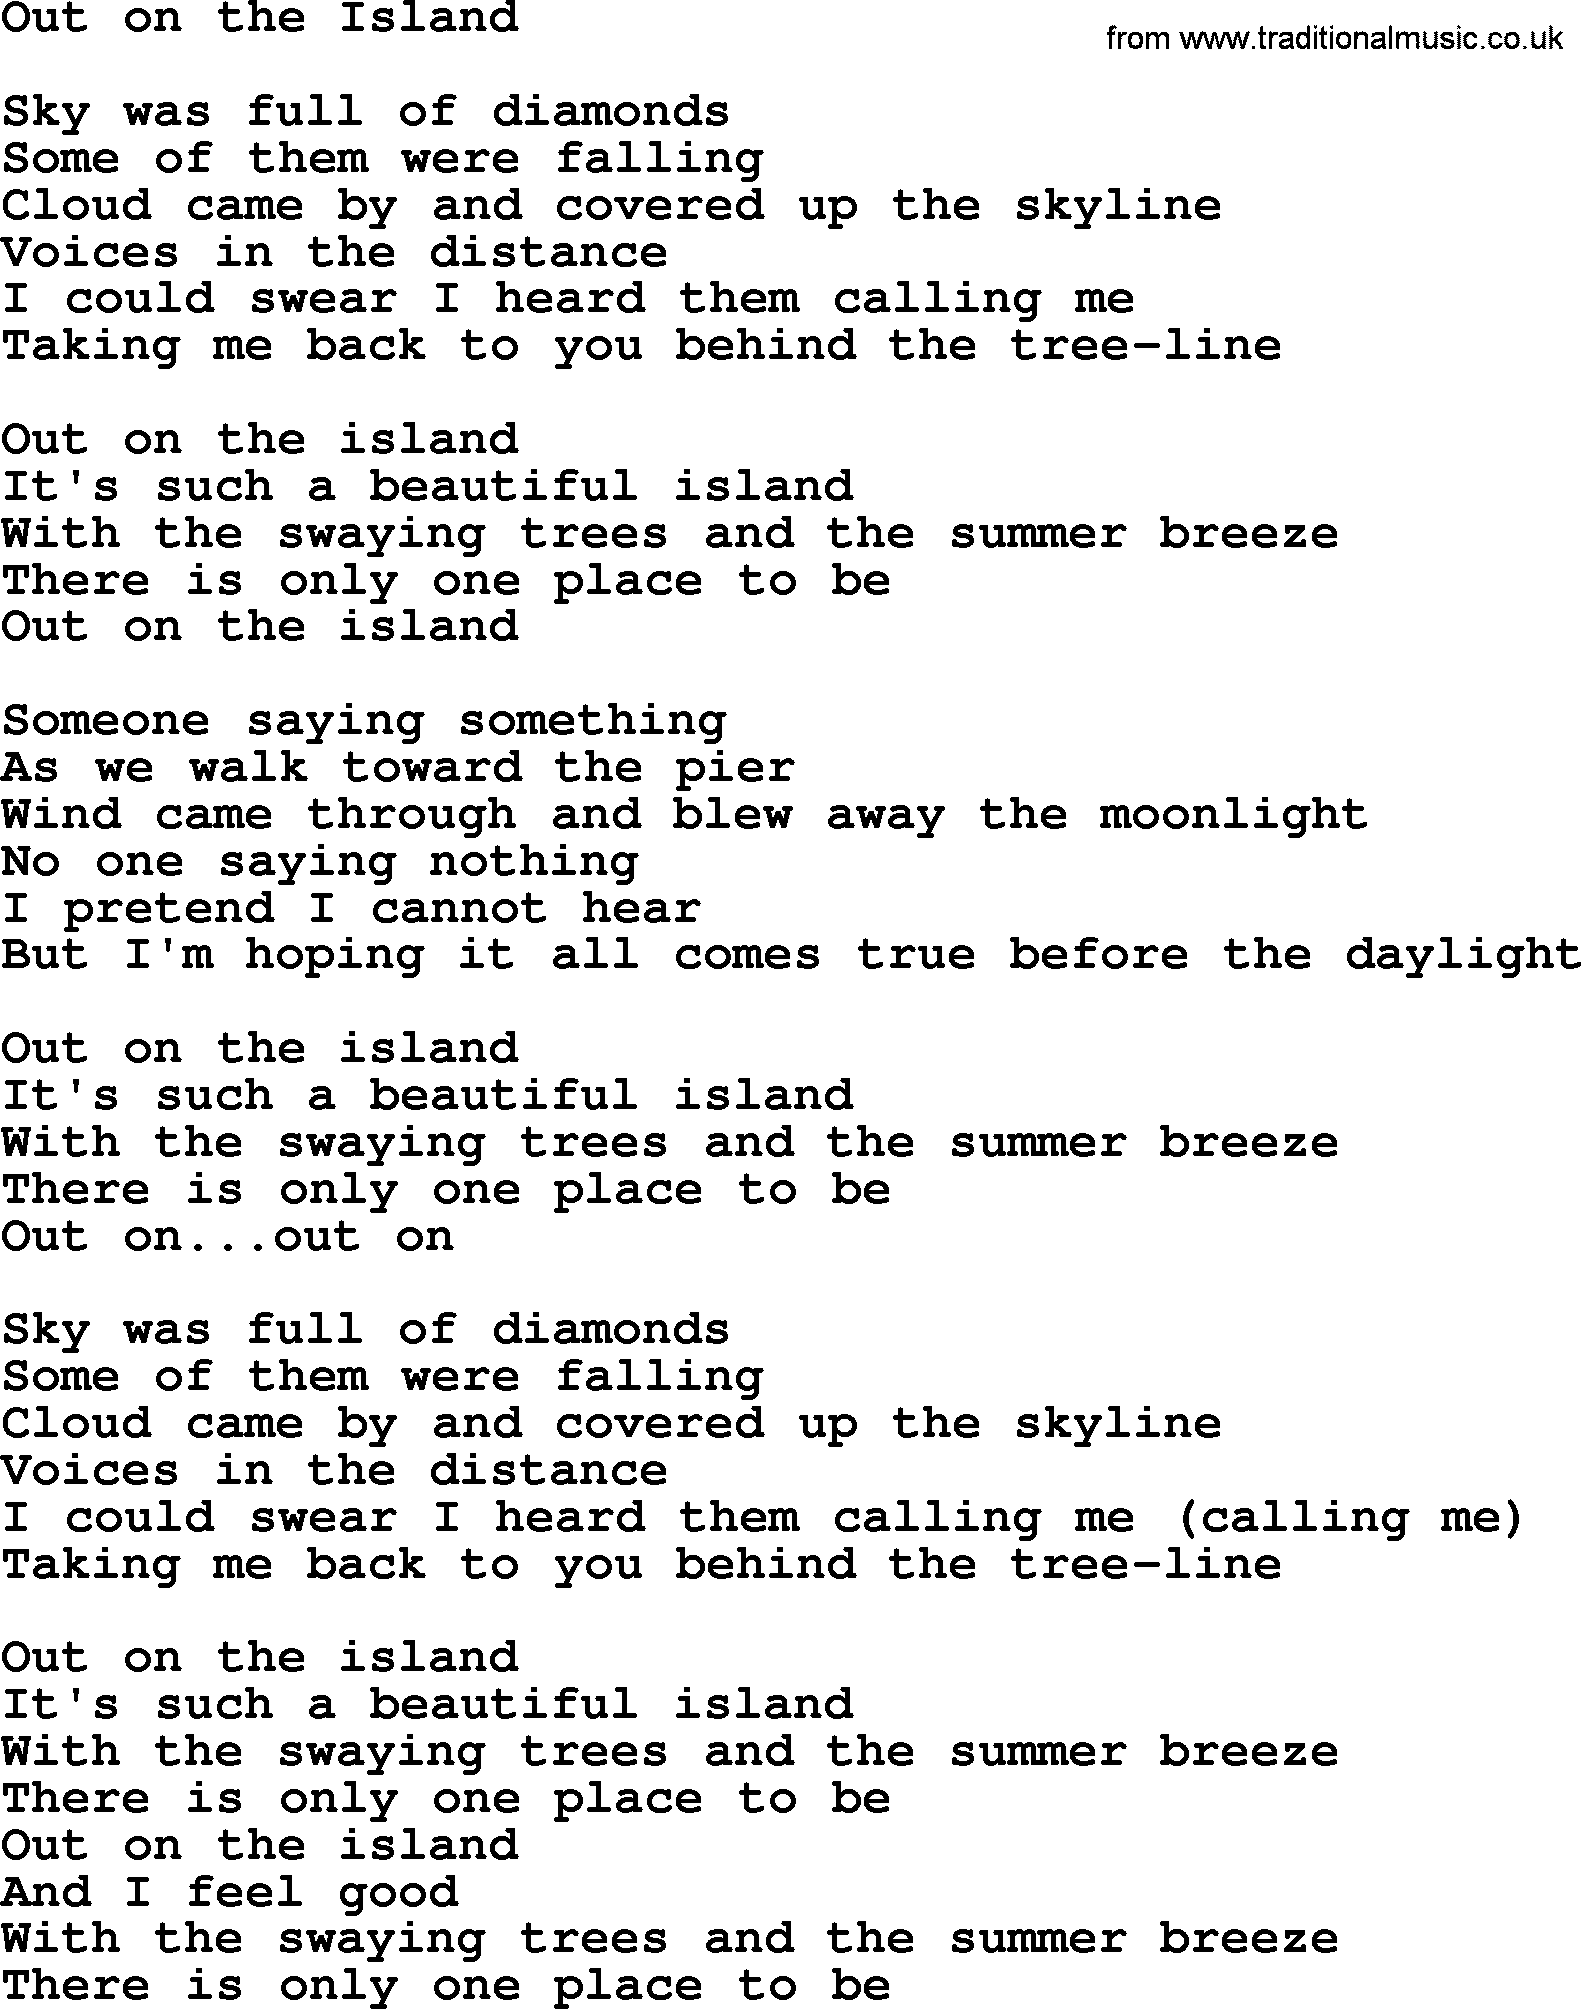 The Byrds song Out On The Island, lyrics